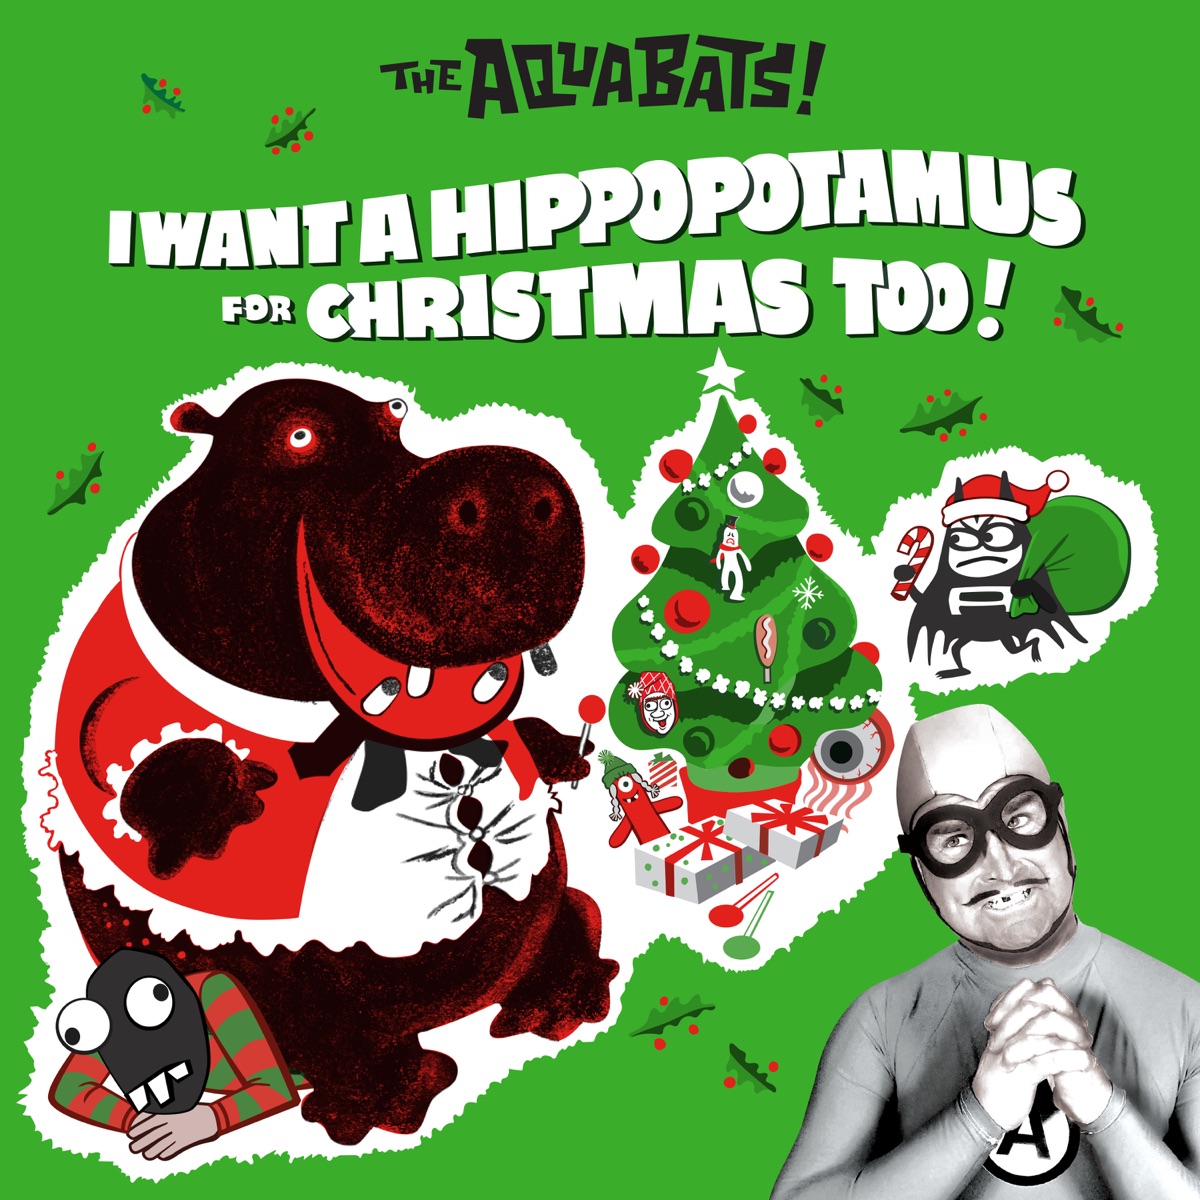 I Want a Hippopotamus for Christmas Too! - EP - Album by The